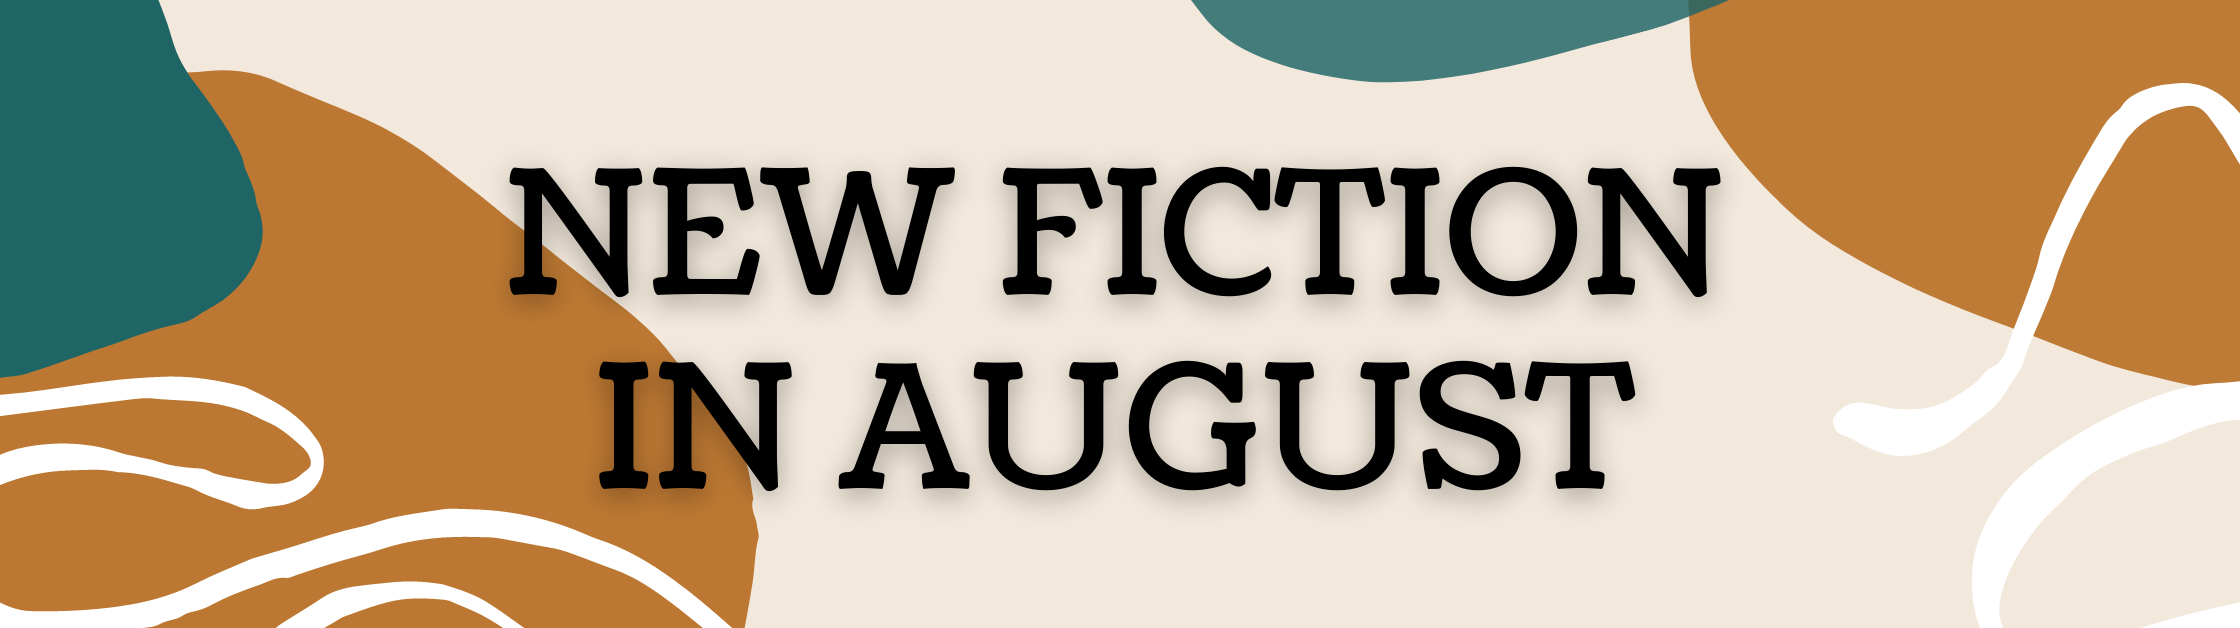 New fiction in August